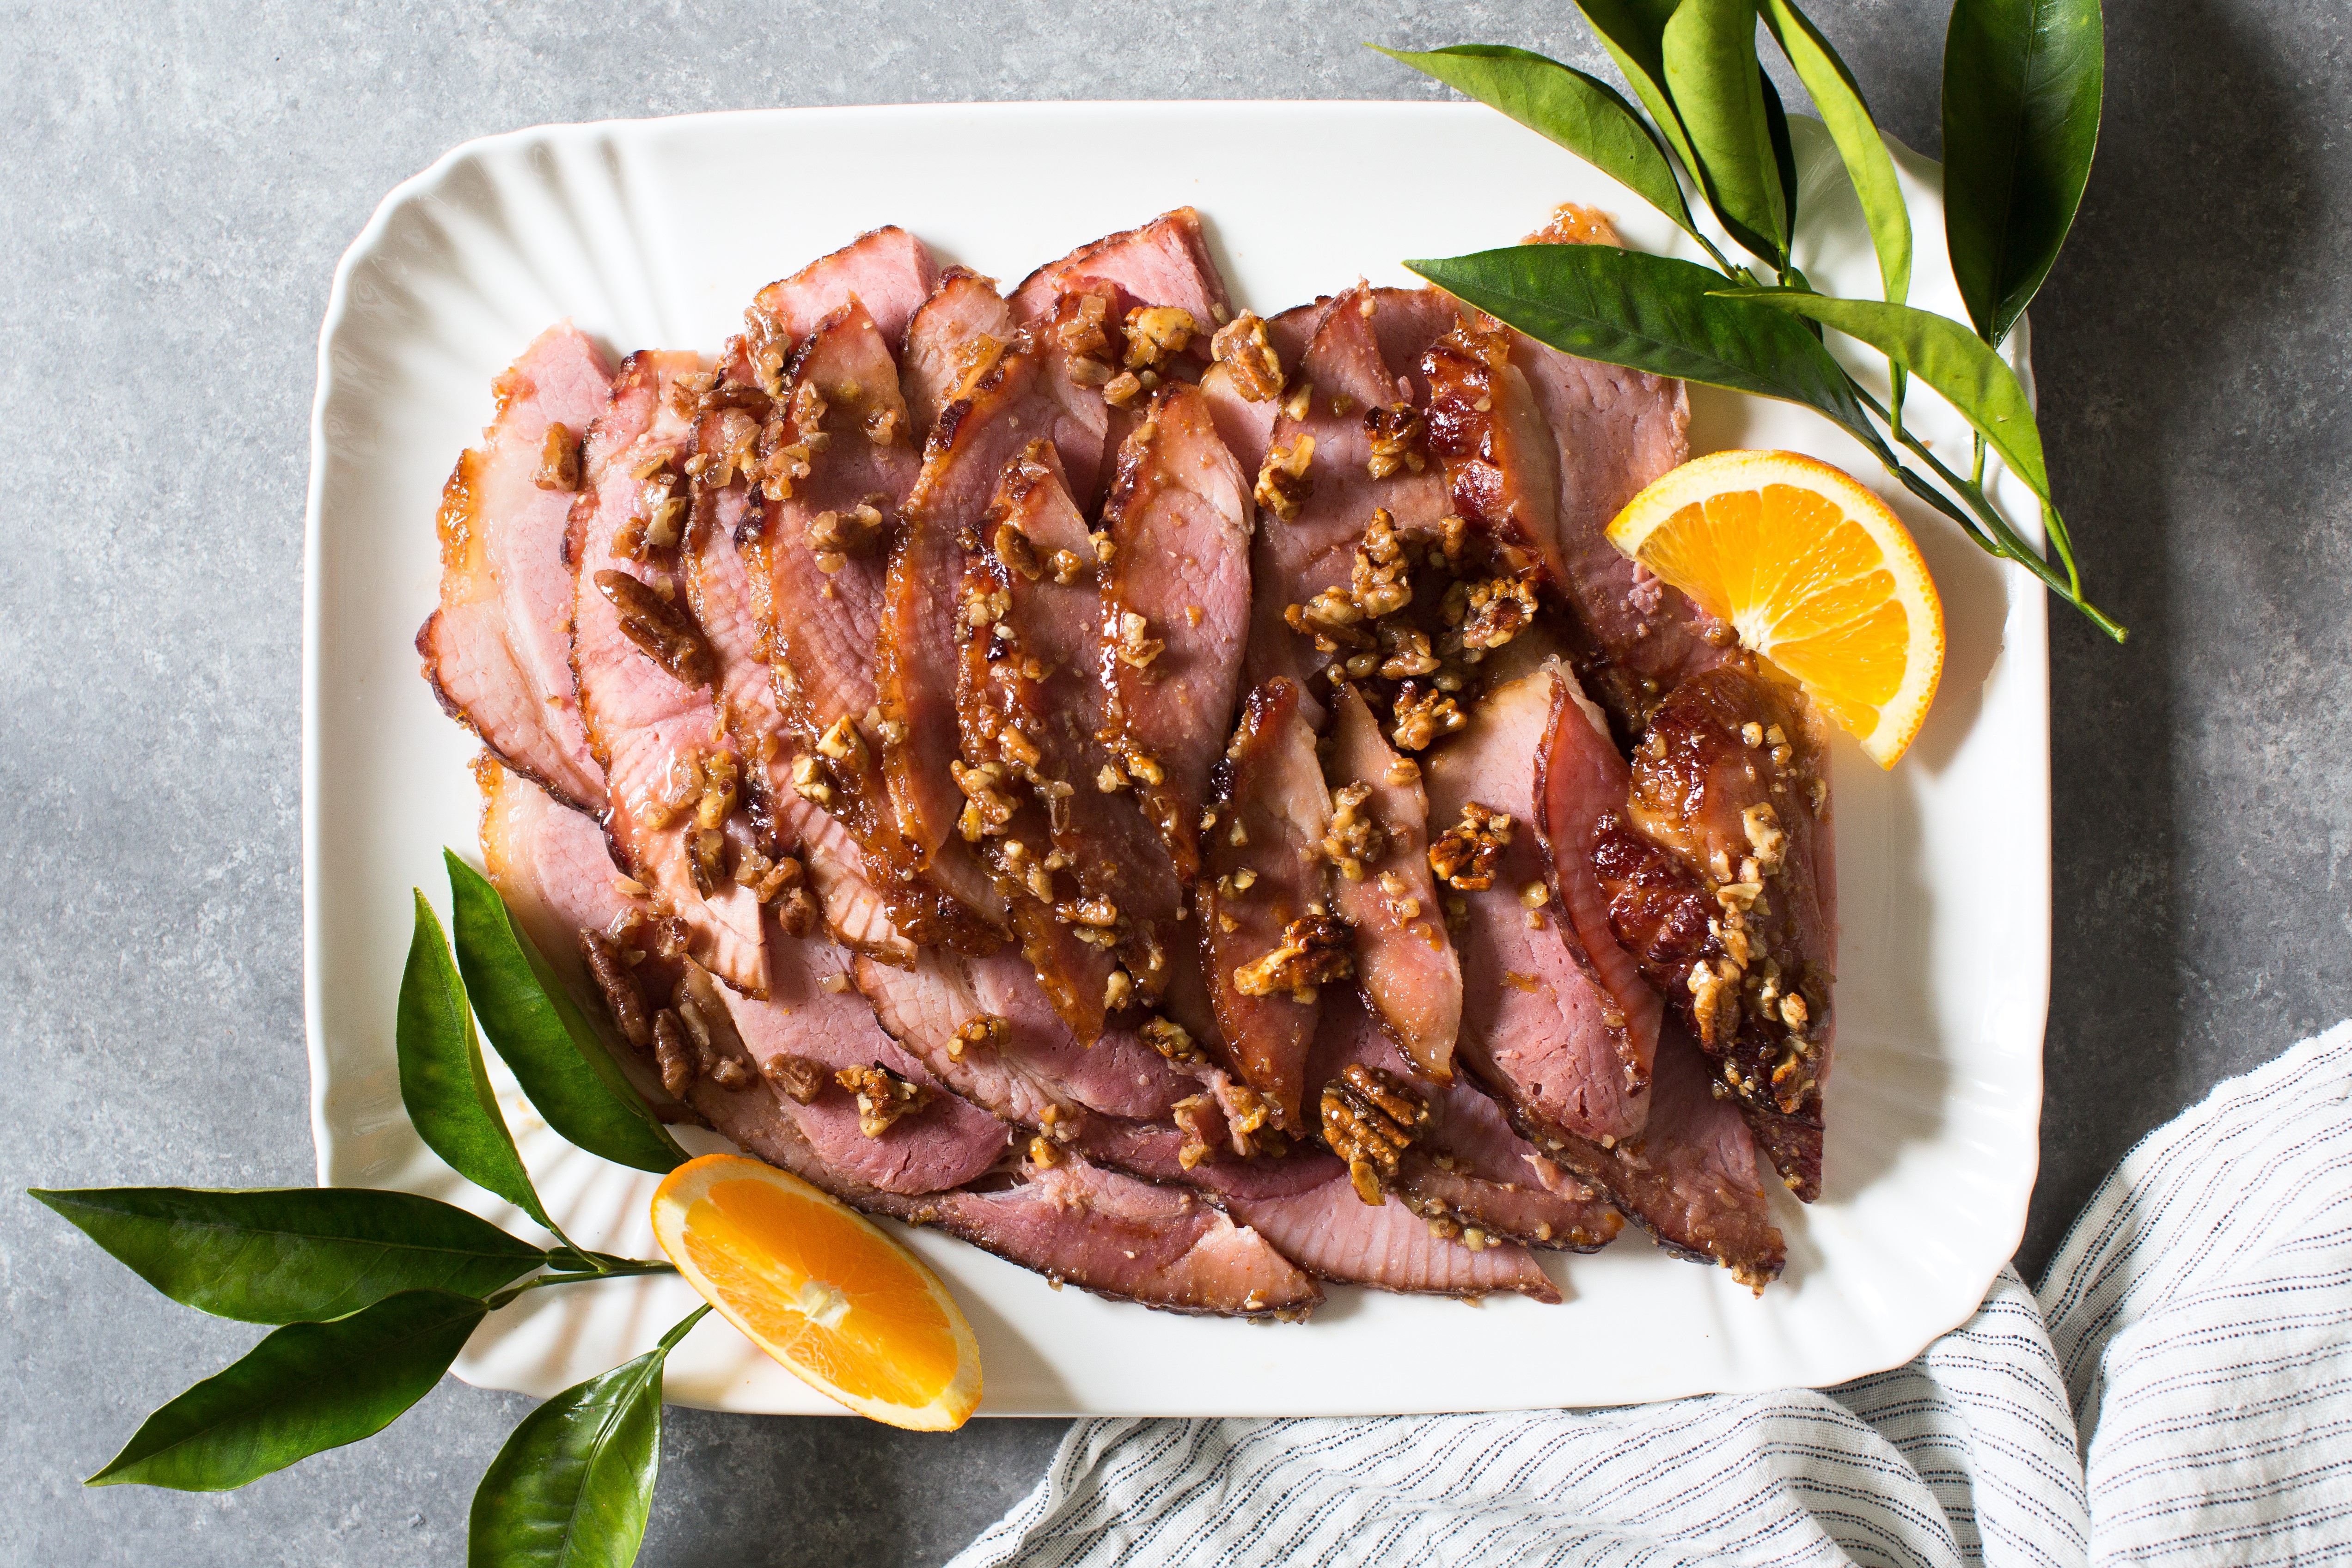 Coated with crunchy and naturally sweet fresh pecans, orange juice, bourbon and maple syrup, this recipe for Pecan, Orange and Bourbon Glazed ham hits the spot for savory and sweet lovers alike.